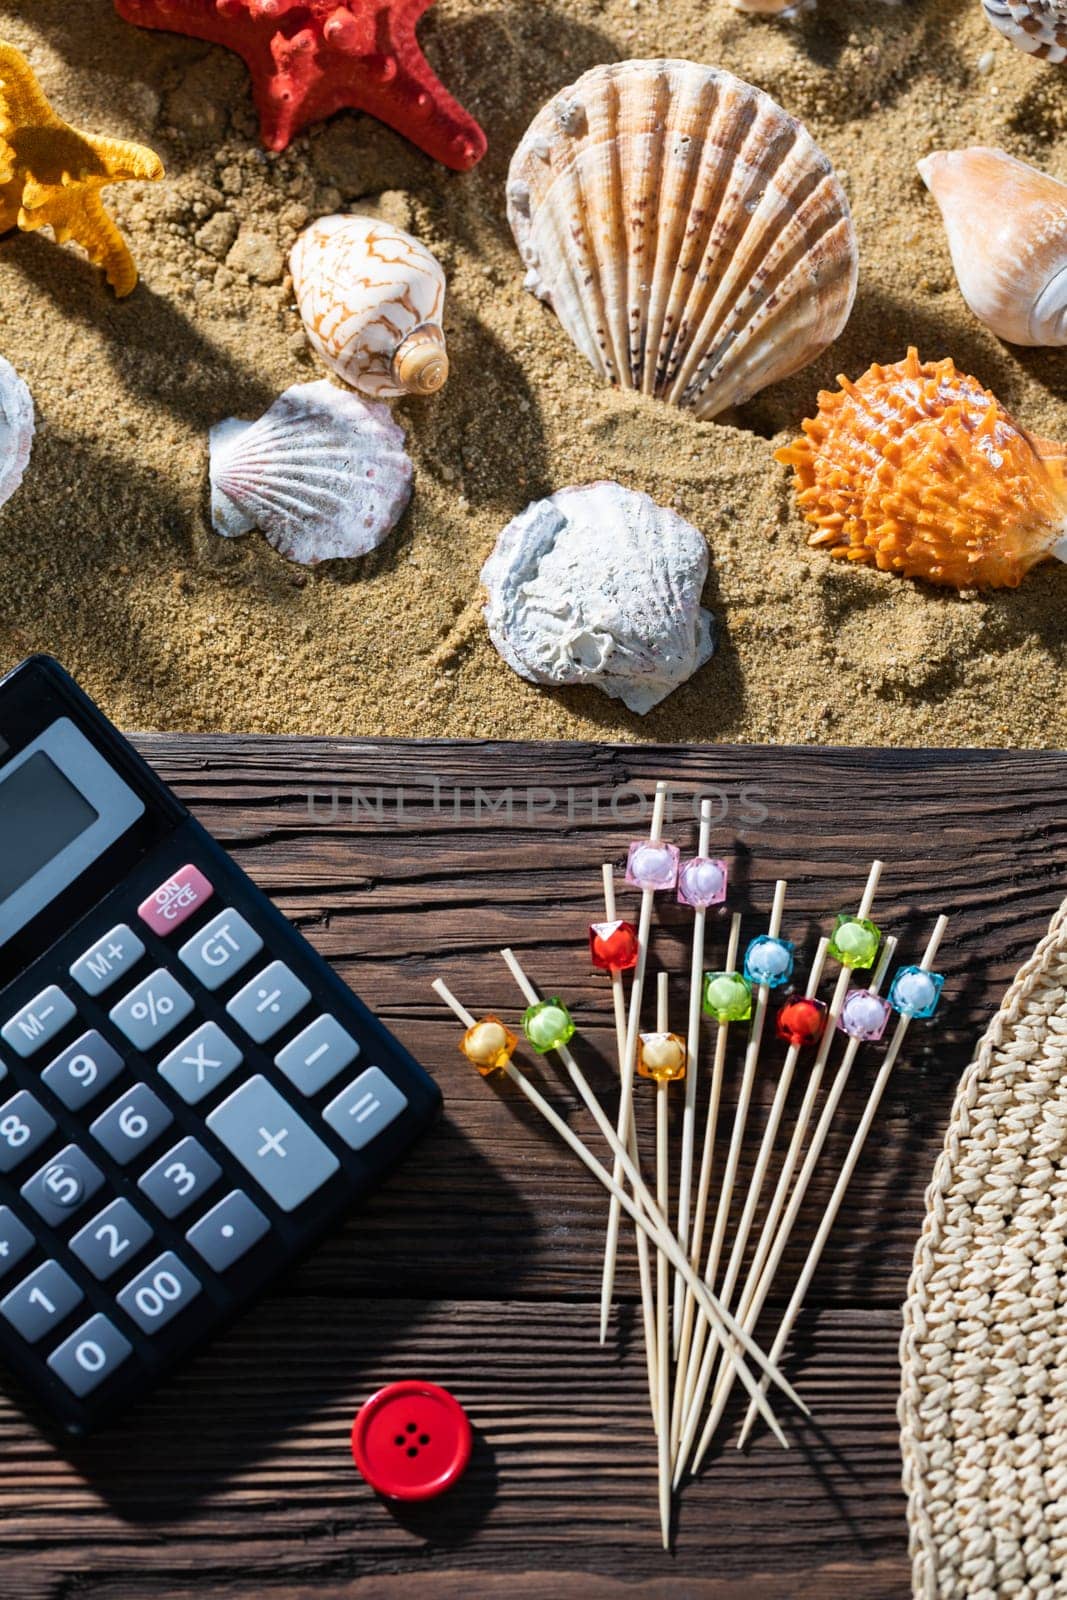 A thoughtful holiday trip with a calculator in hand. Sea beach full of felt-tip pen and shells.